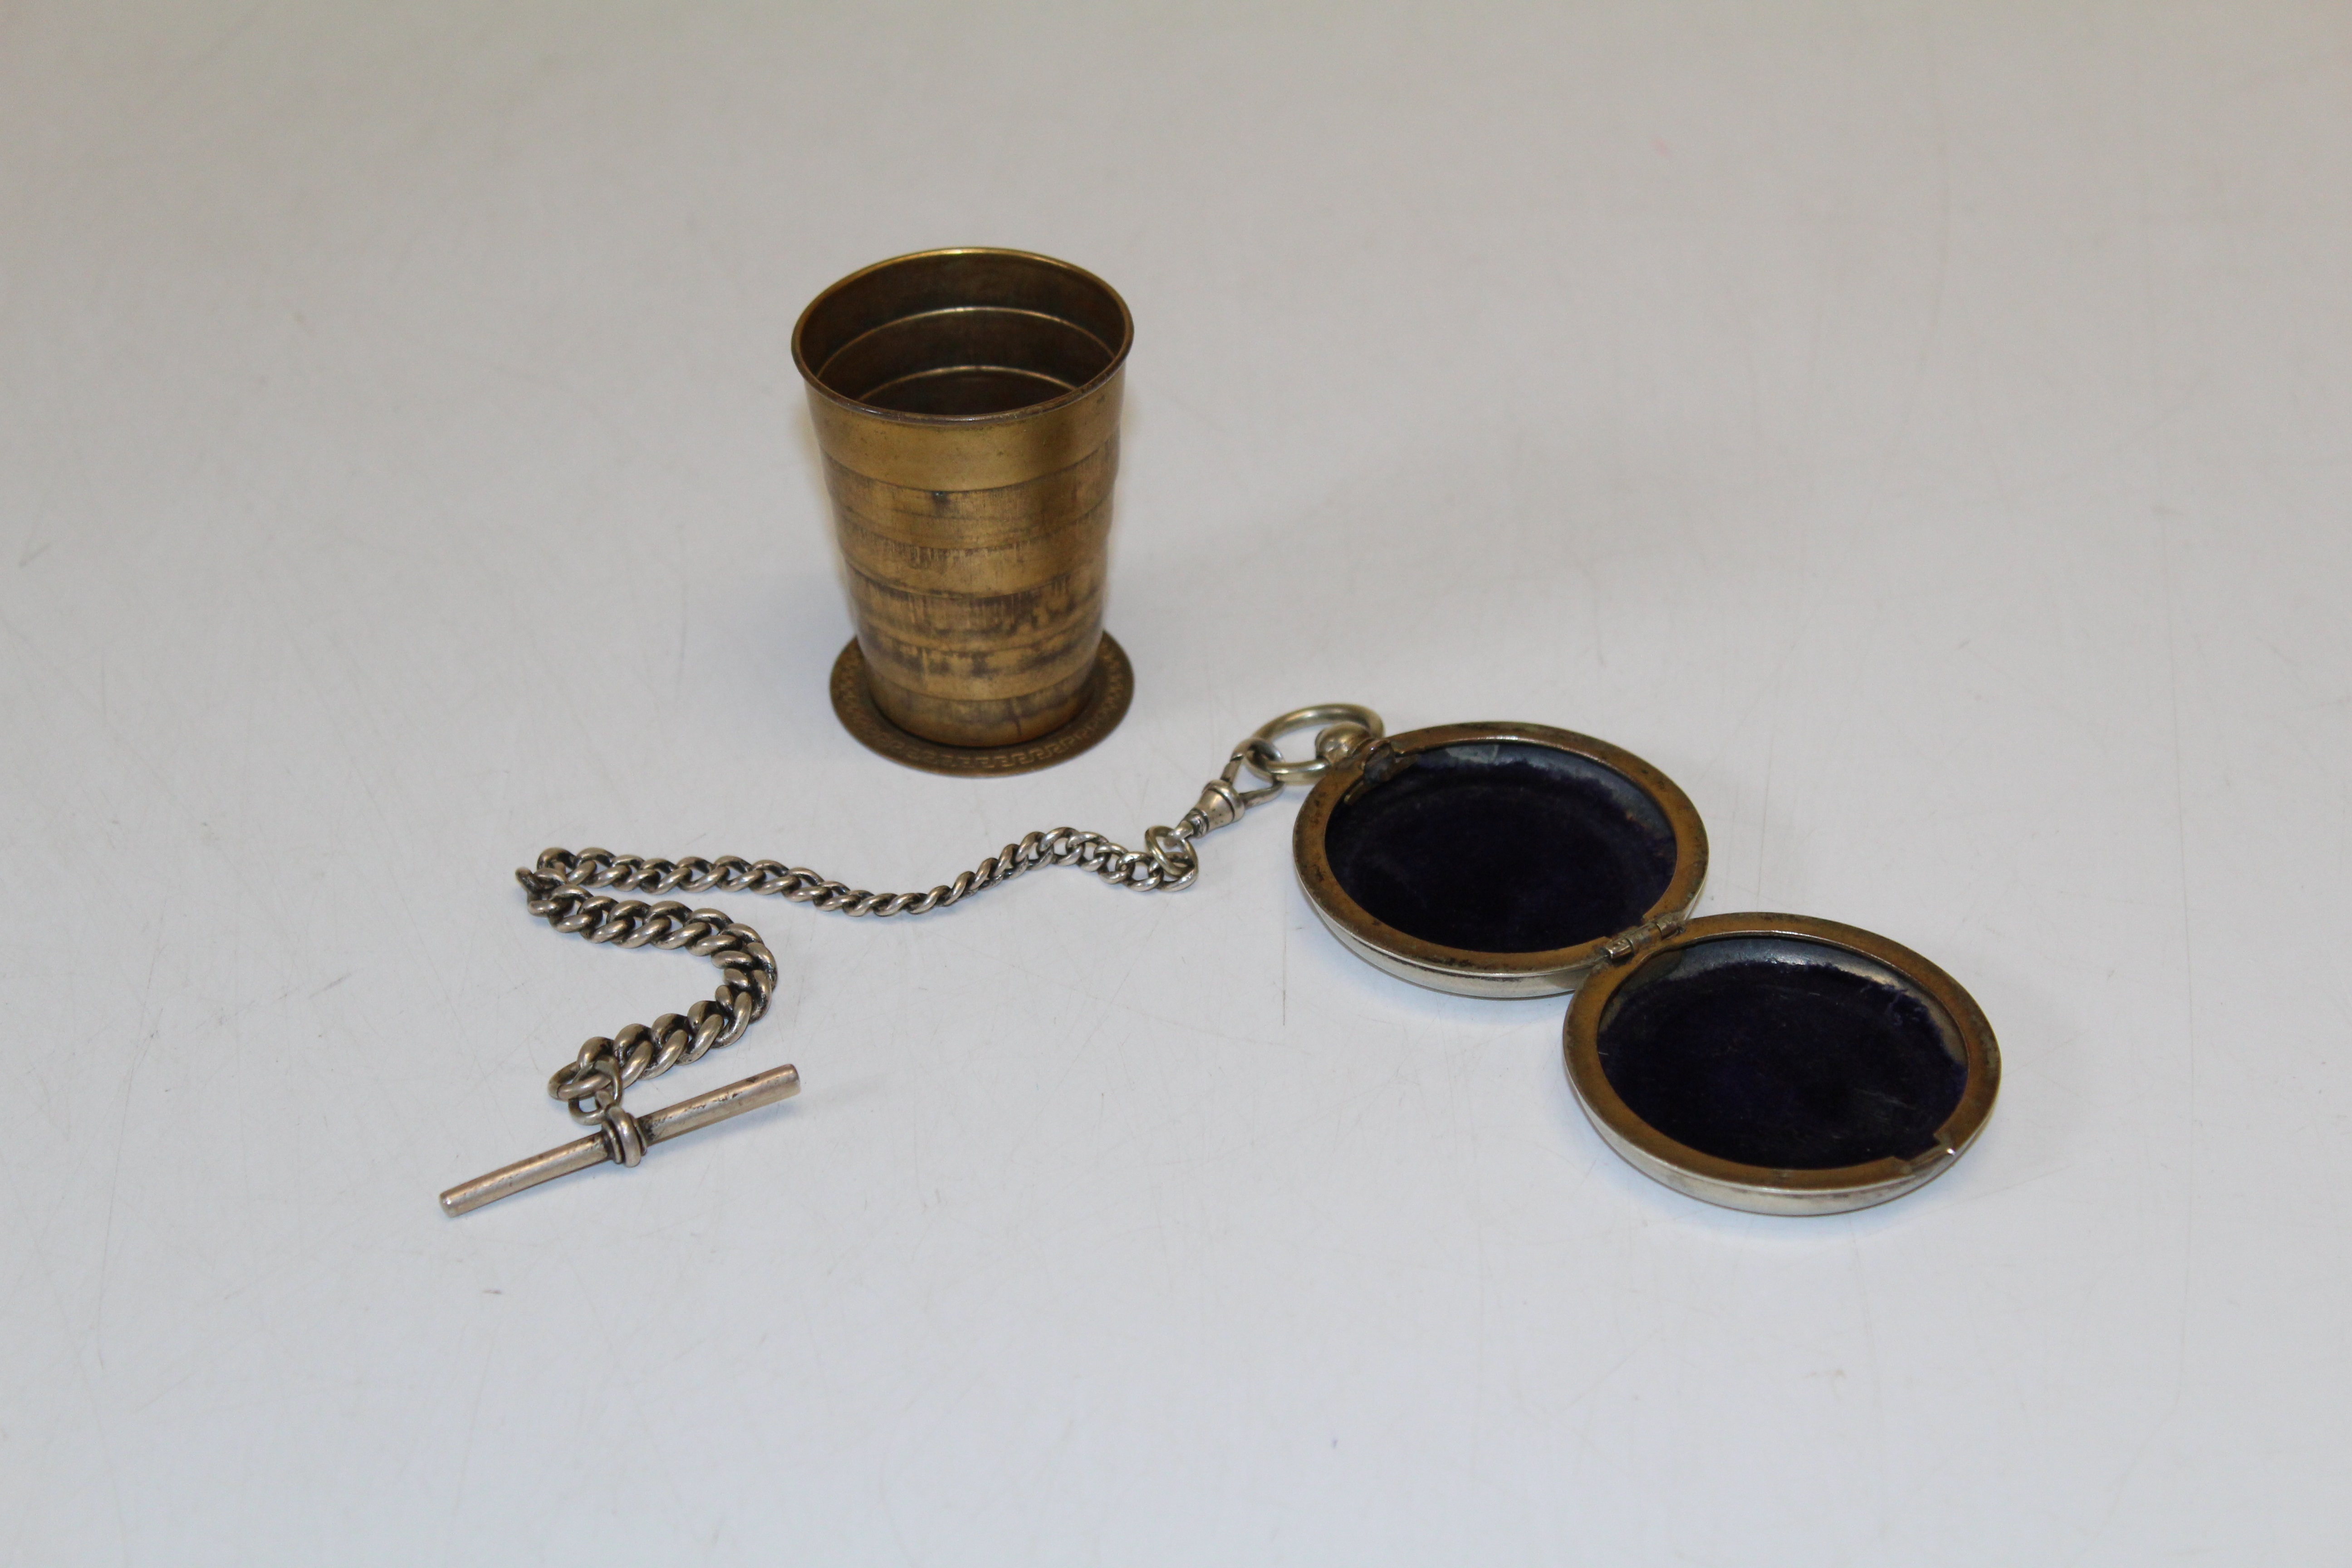 Collapsible cup into a pocket watch case with a silver Albert watch chain. Patent number I5061